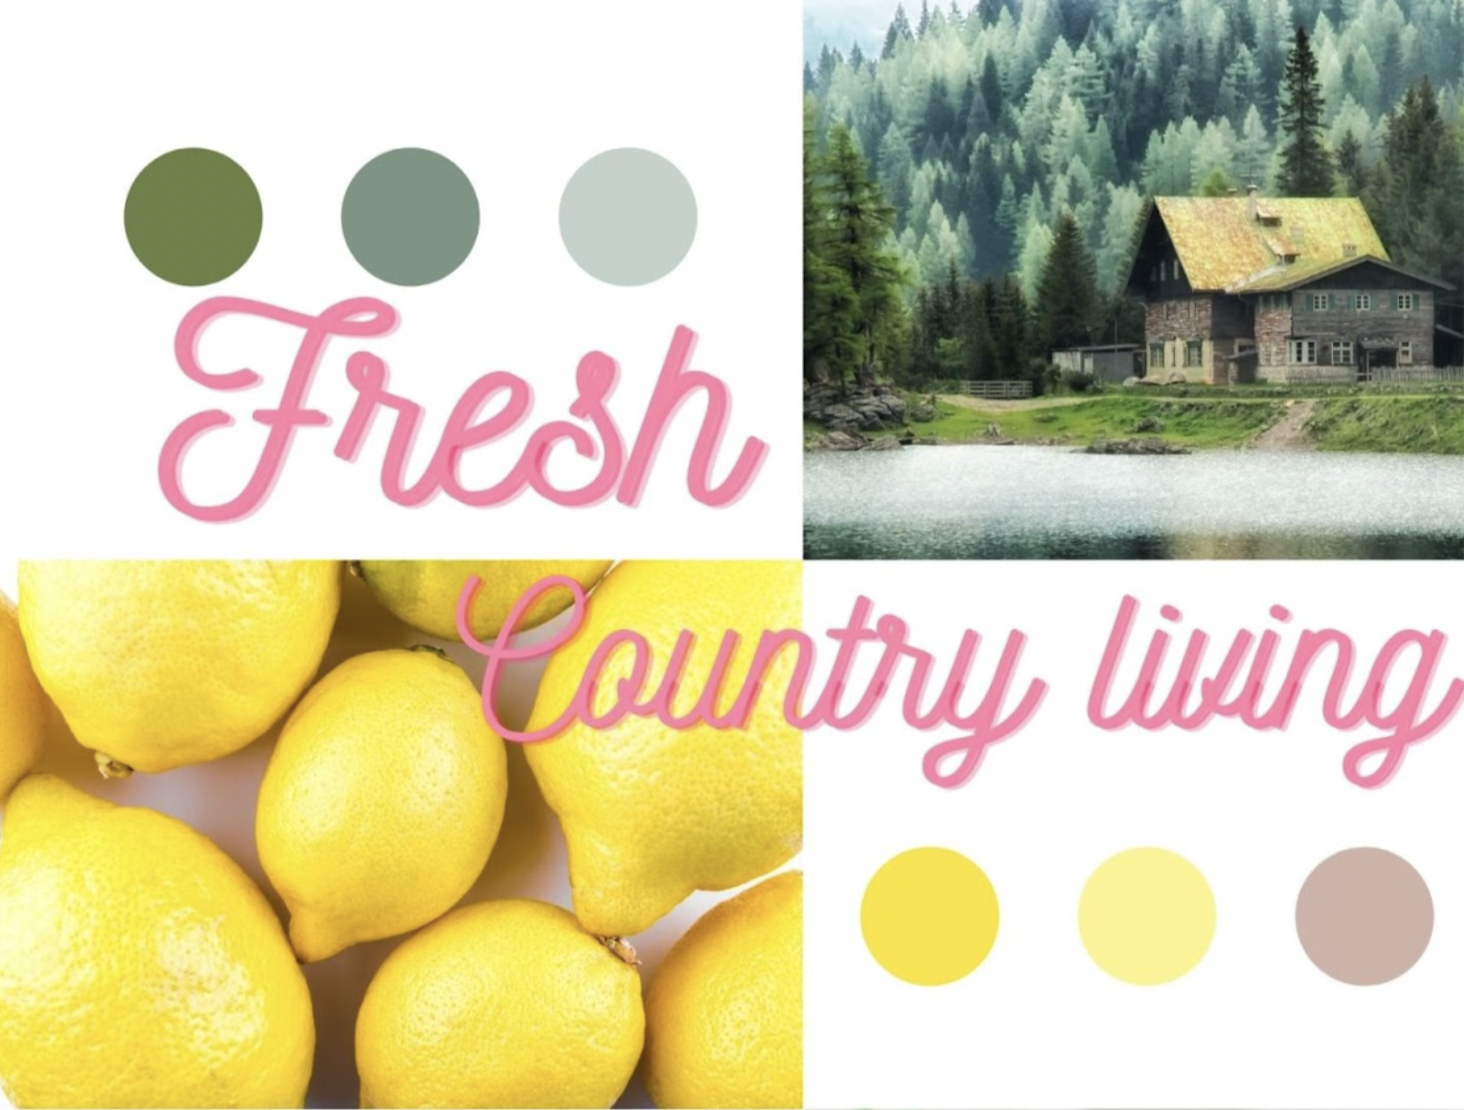 Templated created using Canva that reads "Fresh country living"